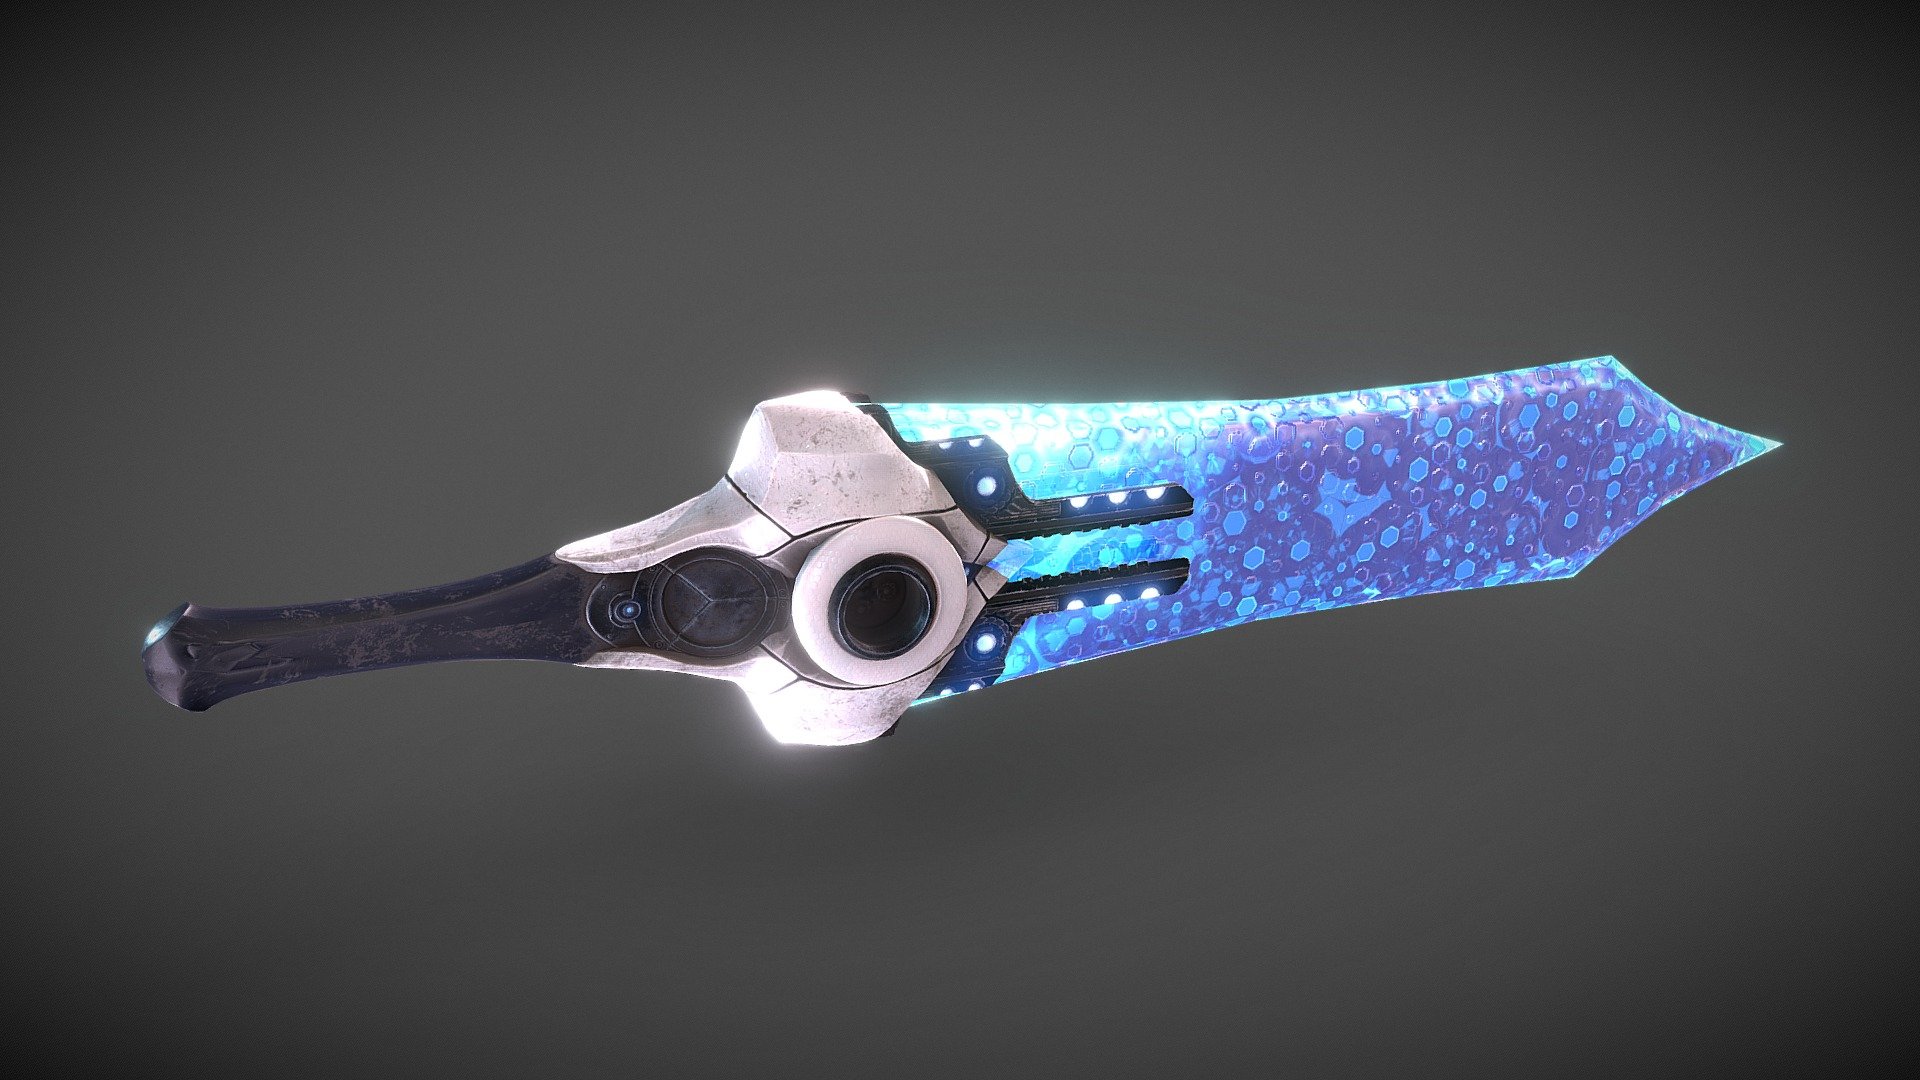 Another part of the SciFi weapon series I’m working on. This Greatsword has the same specifications as the other weapons in the set and can be used in games or other realtime projects. Full PBR texture set included 3d model